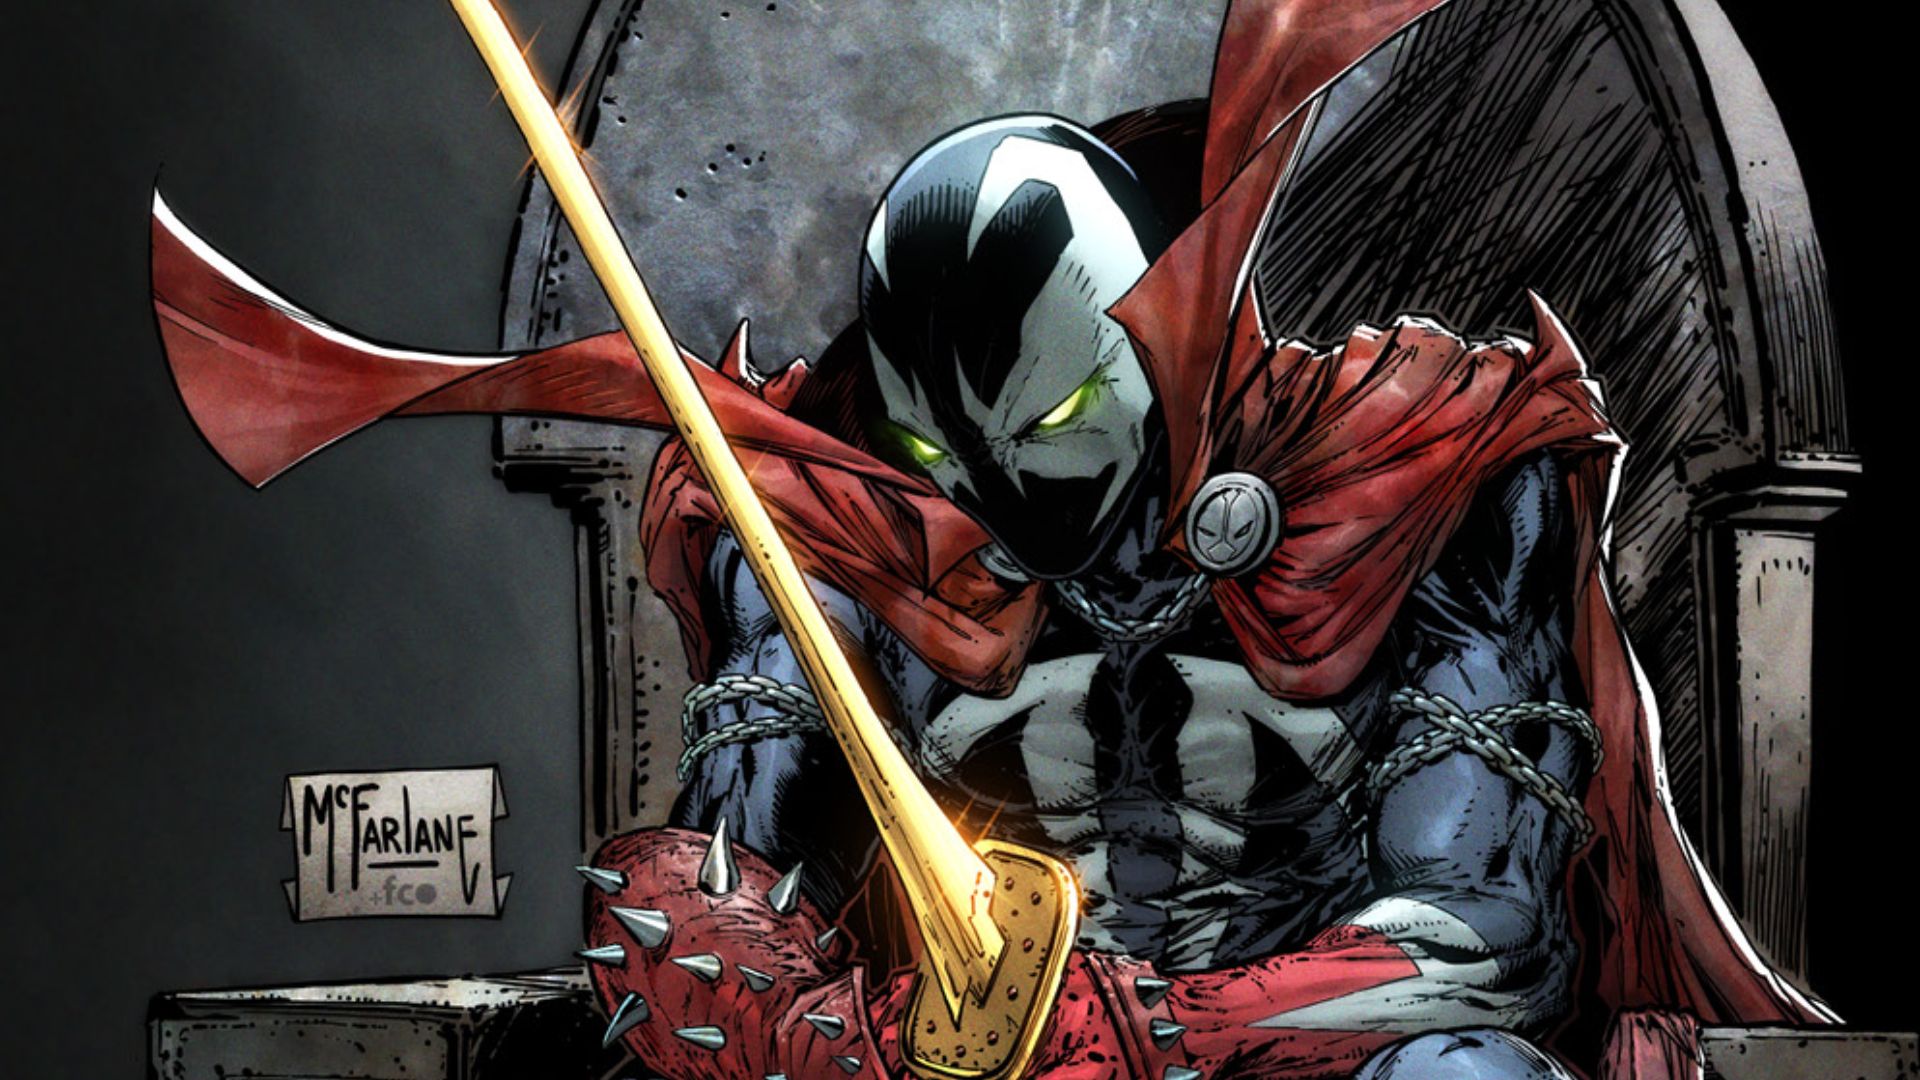 Todd McFarlane on why King Spawn #1 sales are so high and what Spawn can do  that Marvel and DC can't | GamesRadar+